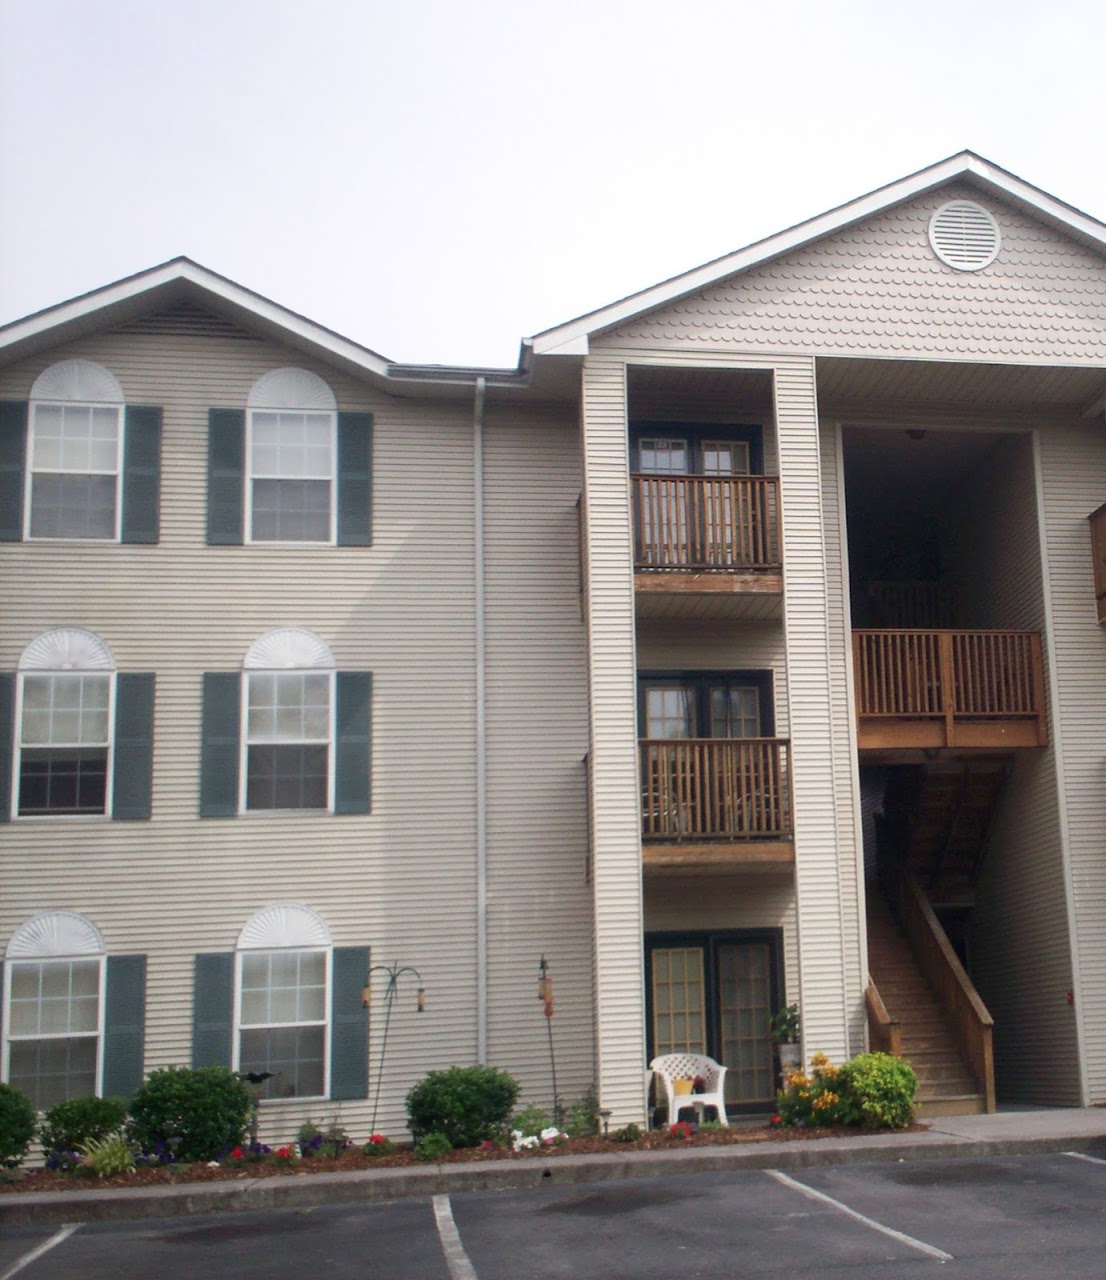 Photo of ONE WILCOX PLACE. Affordable housing located at 650 N WILCOX DR KINGSPORT, TN 37660